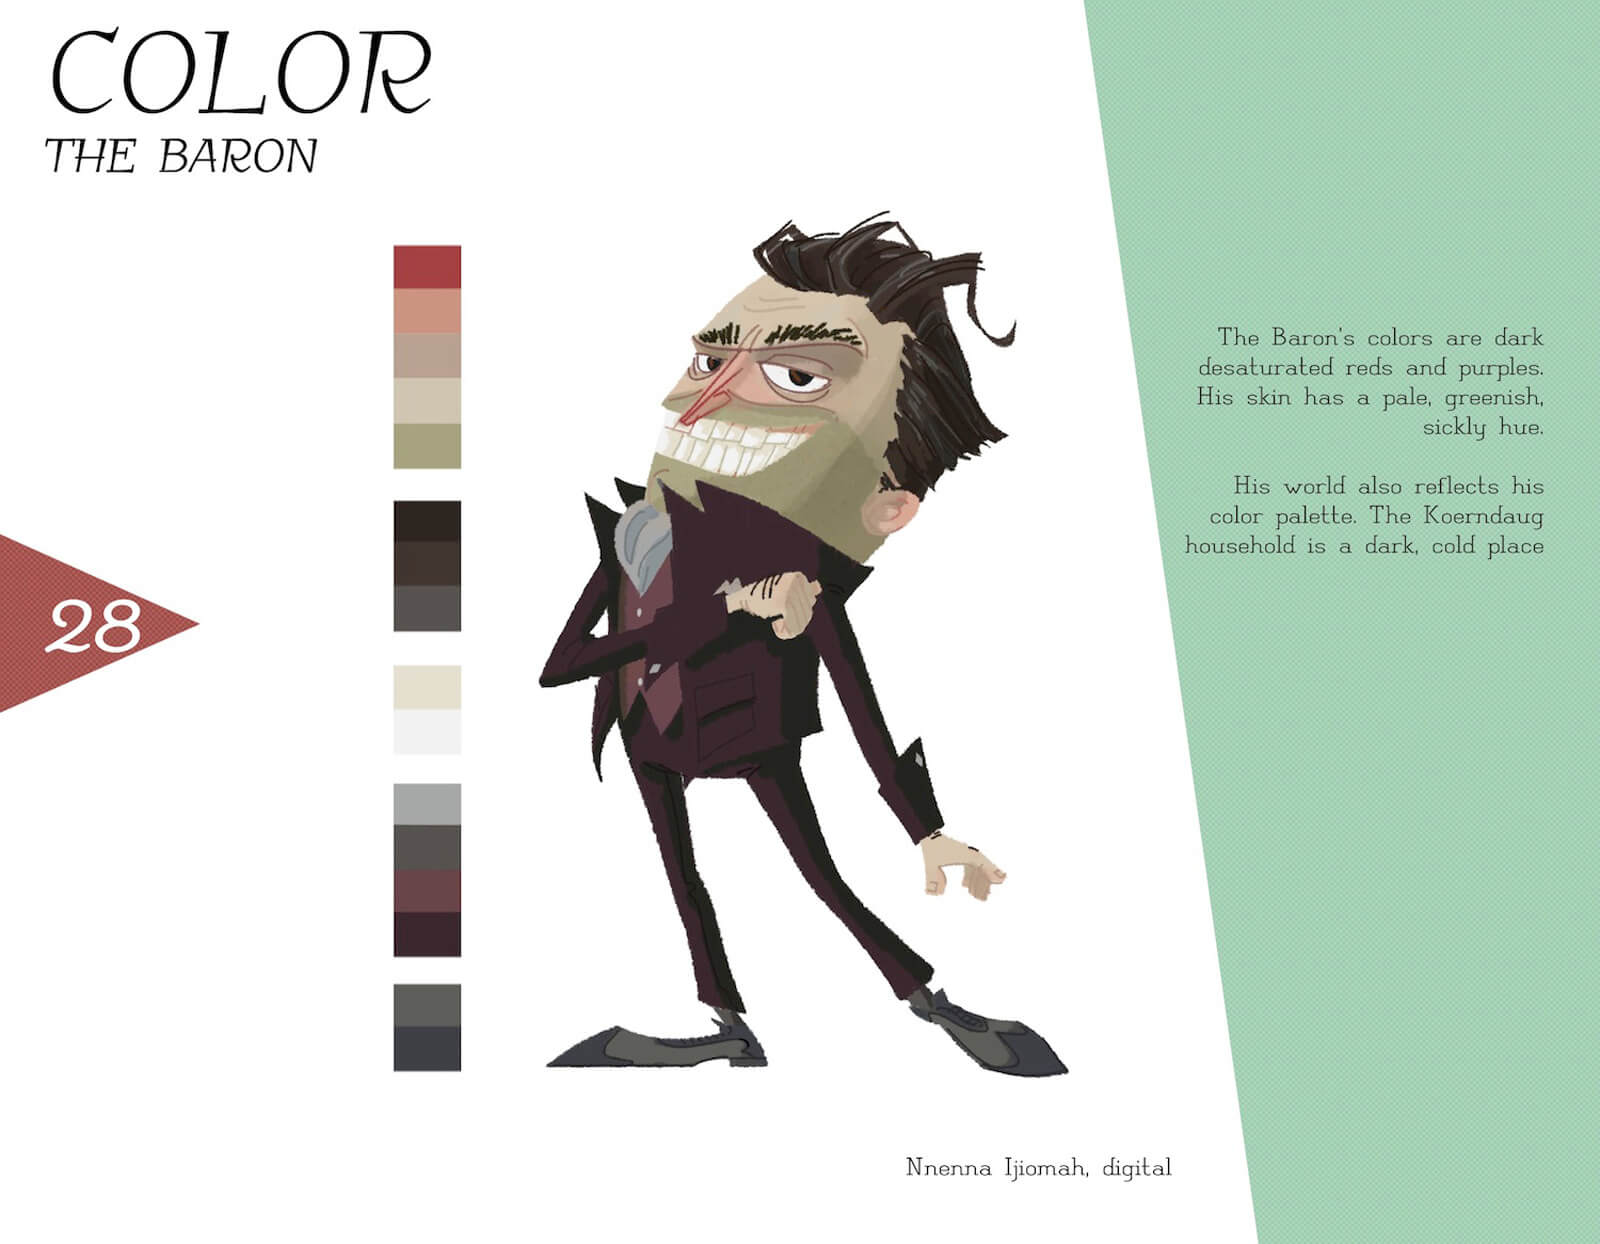 Color profile of the character Baron von Koerndaug, with a posing Baron in a maroon suit